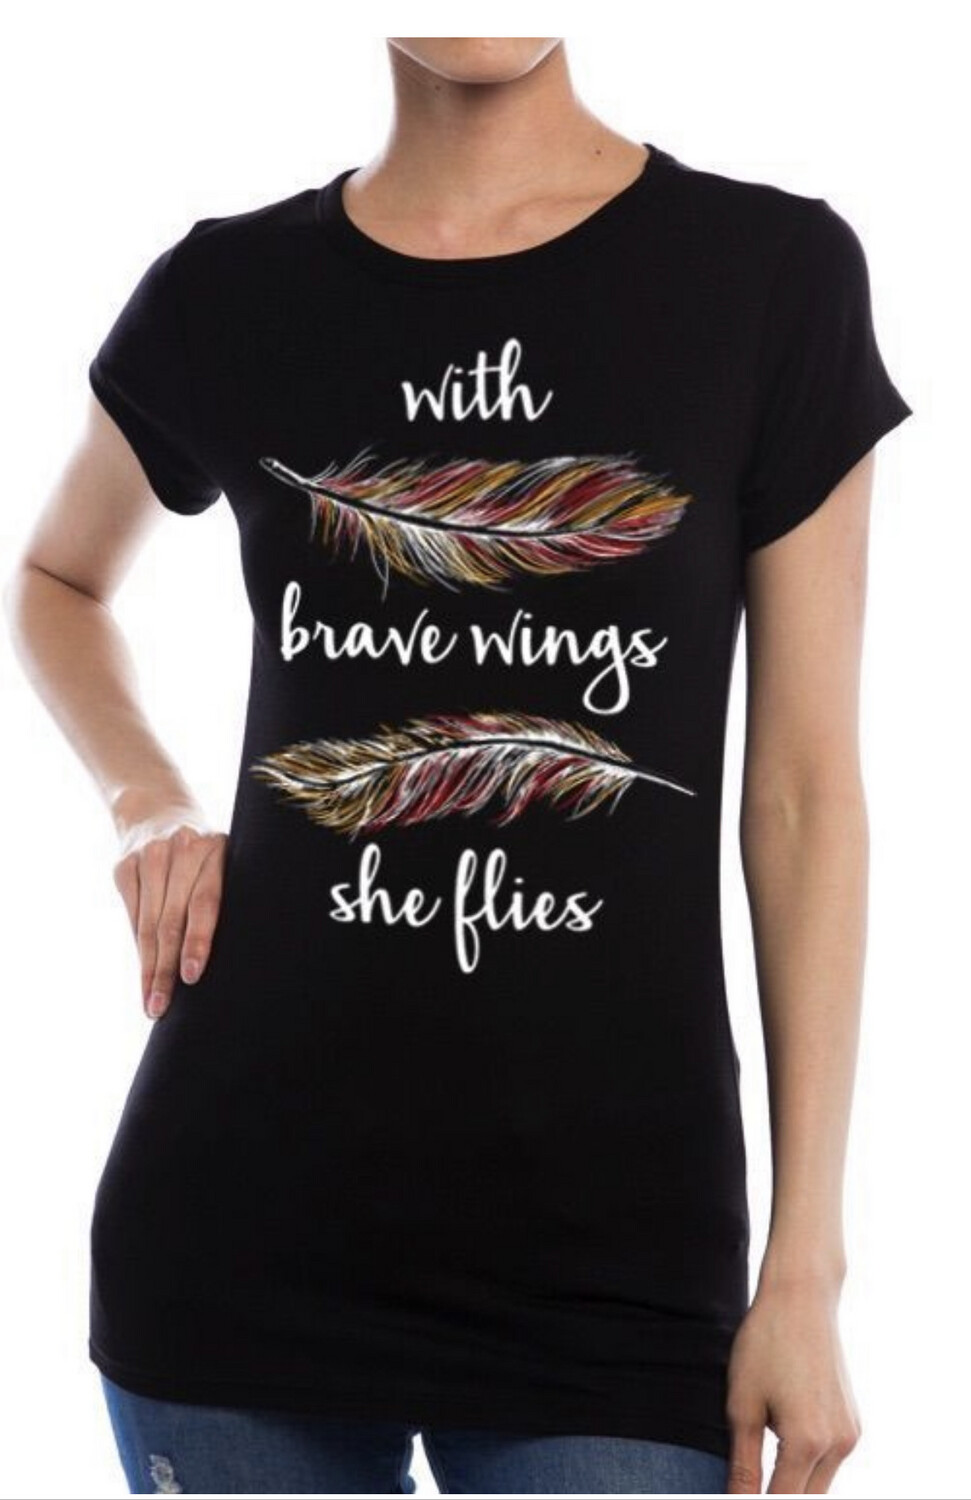 With Brave Wings She Flies Top